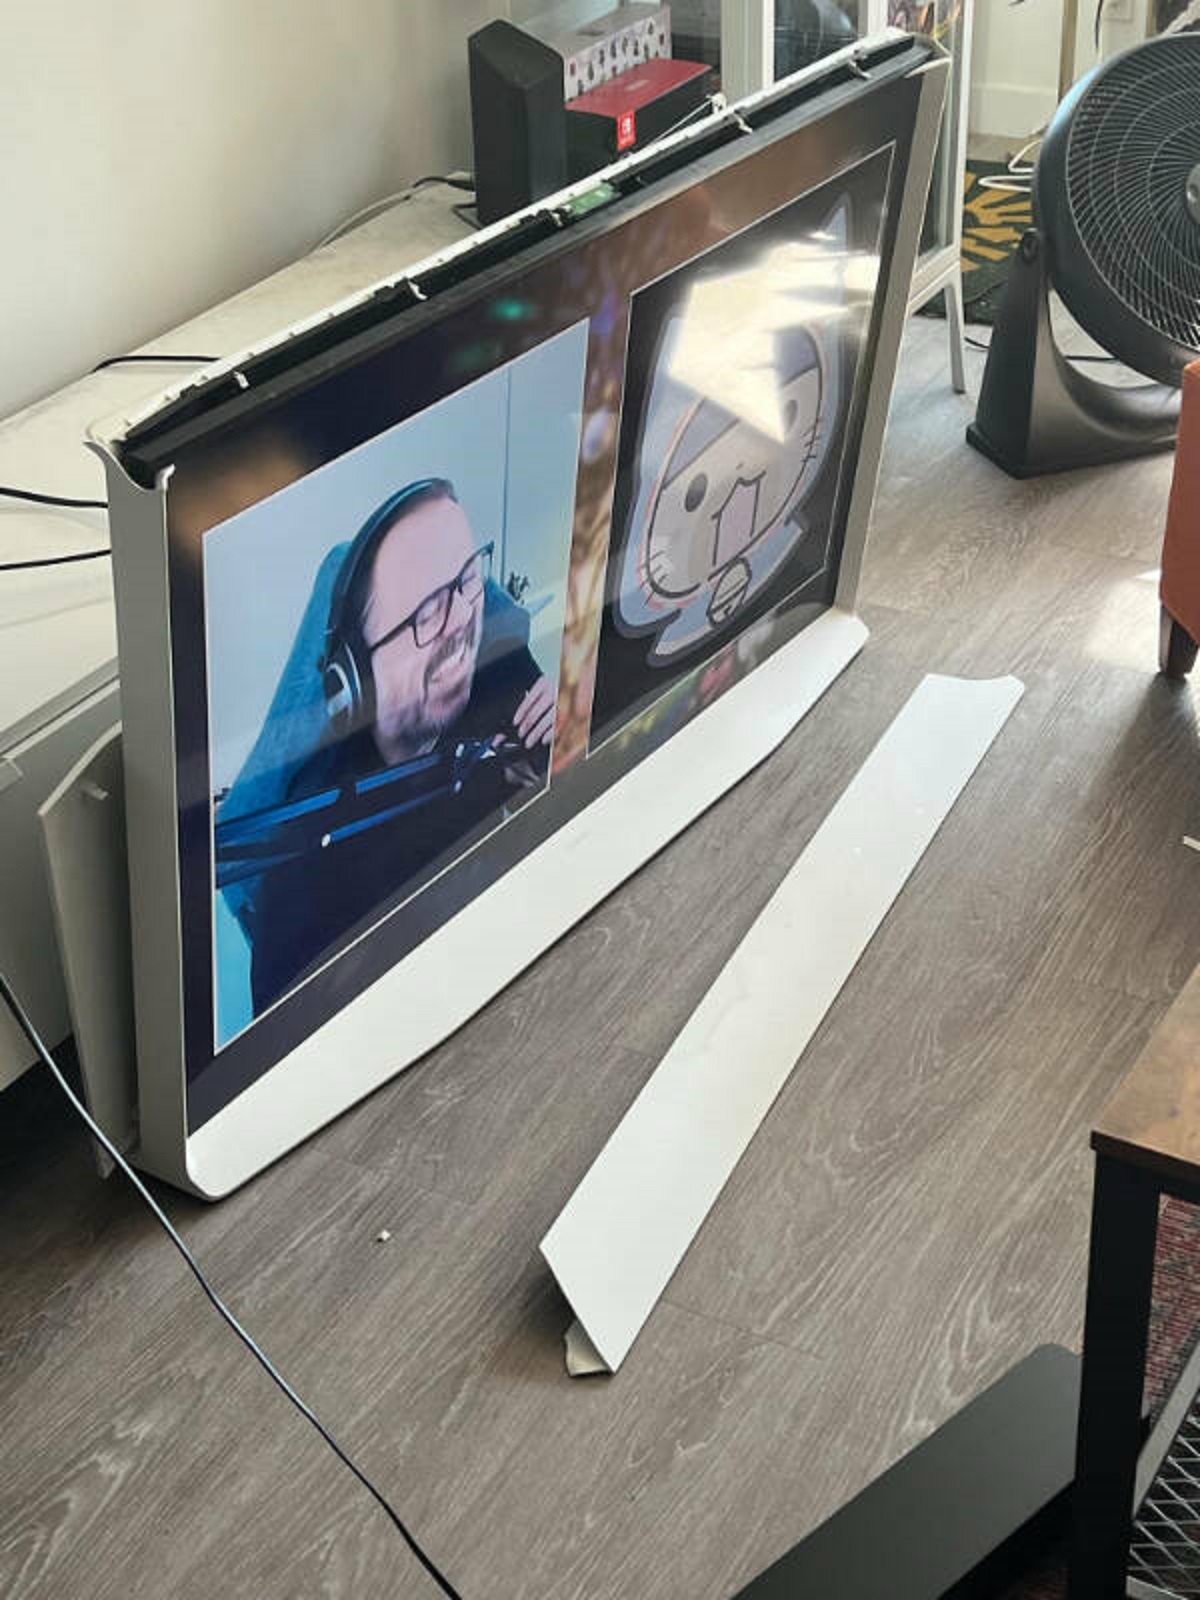 “Cat jumped off the Samsung Serif TV and it fell. Replacing the frame costs $1500”